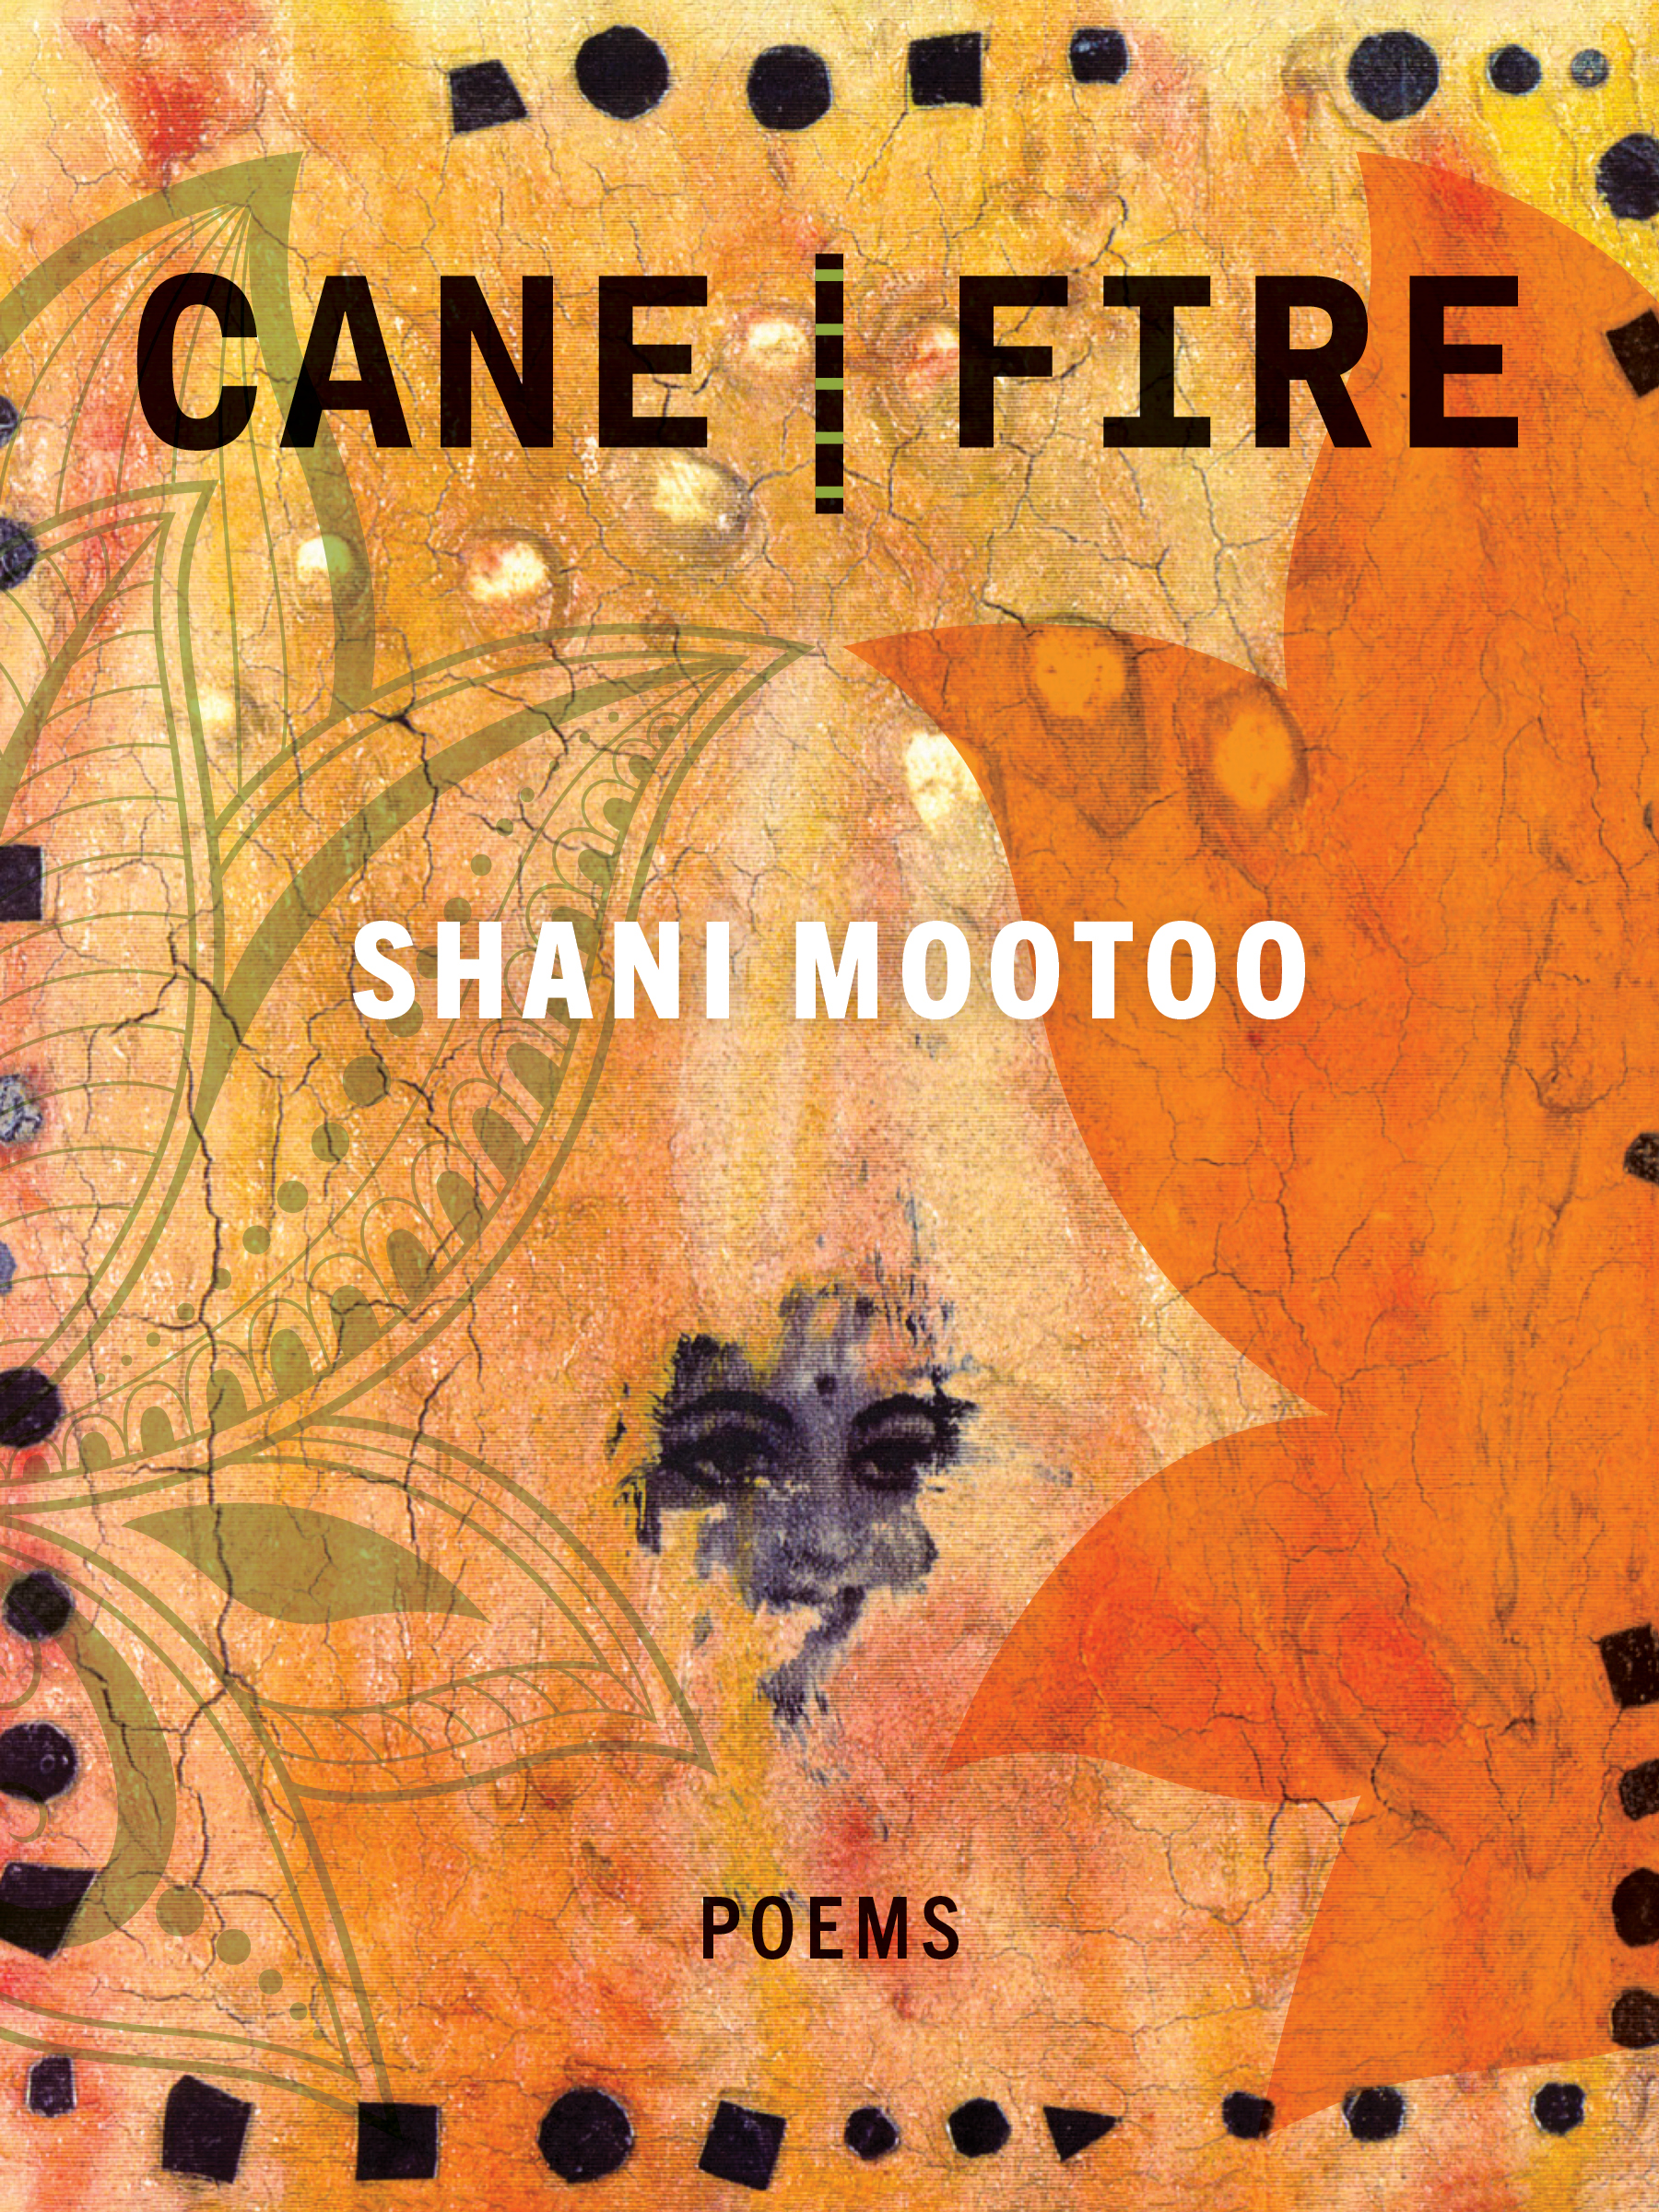 Shani Mootoo's Cane | Fire book cover